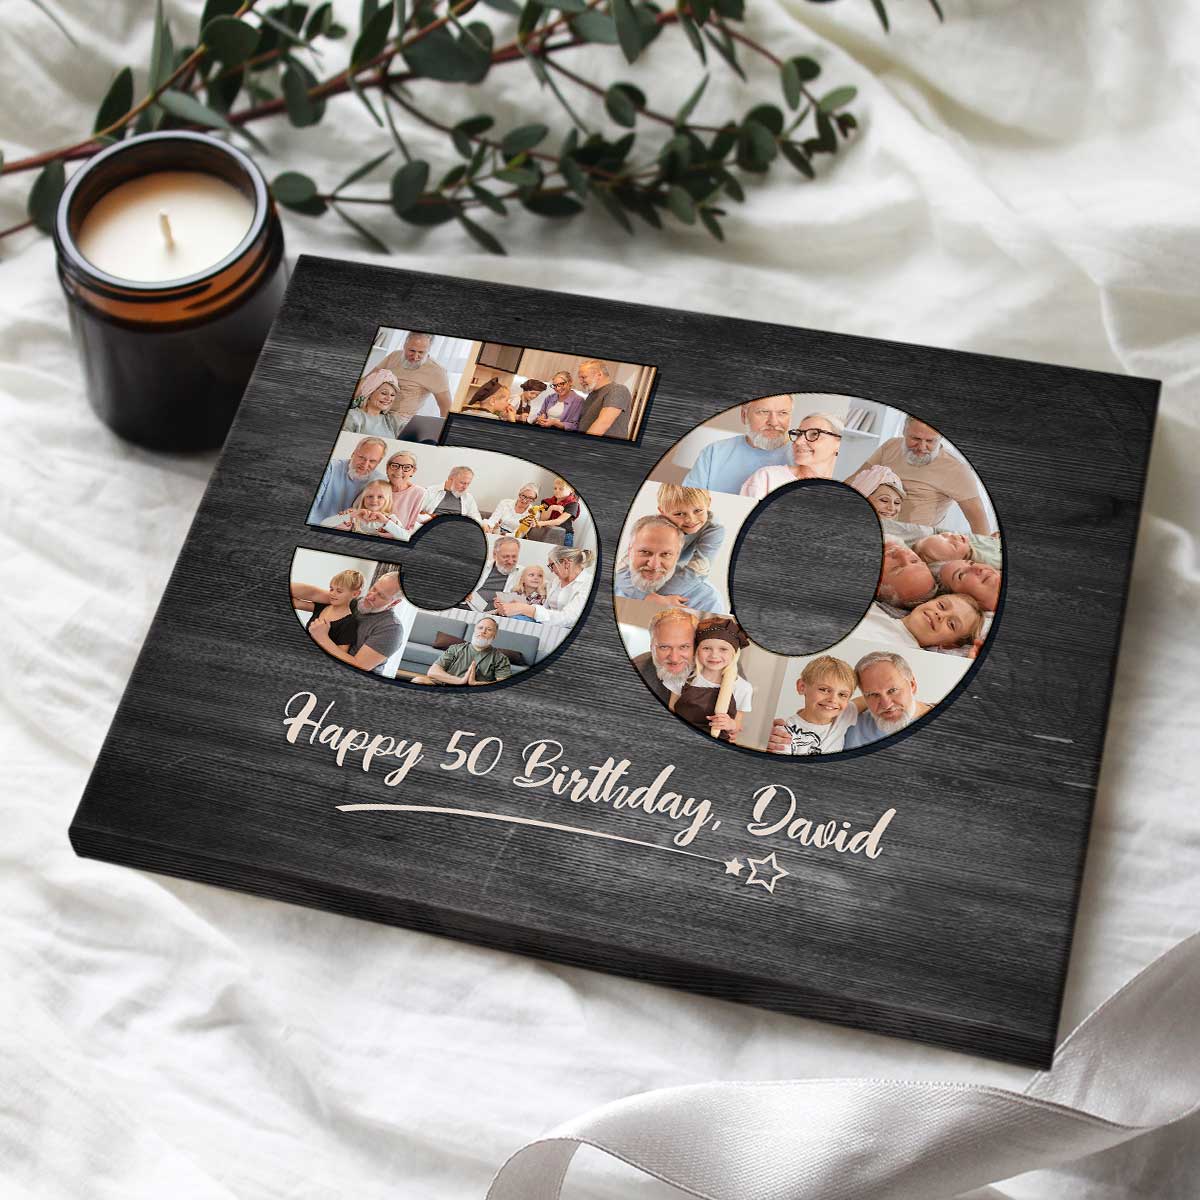 Happy Retirement Gift Ideas Personalized Retirement Gifts Retirement Gift  For Her For Him - Oh Canvas